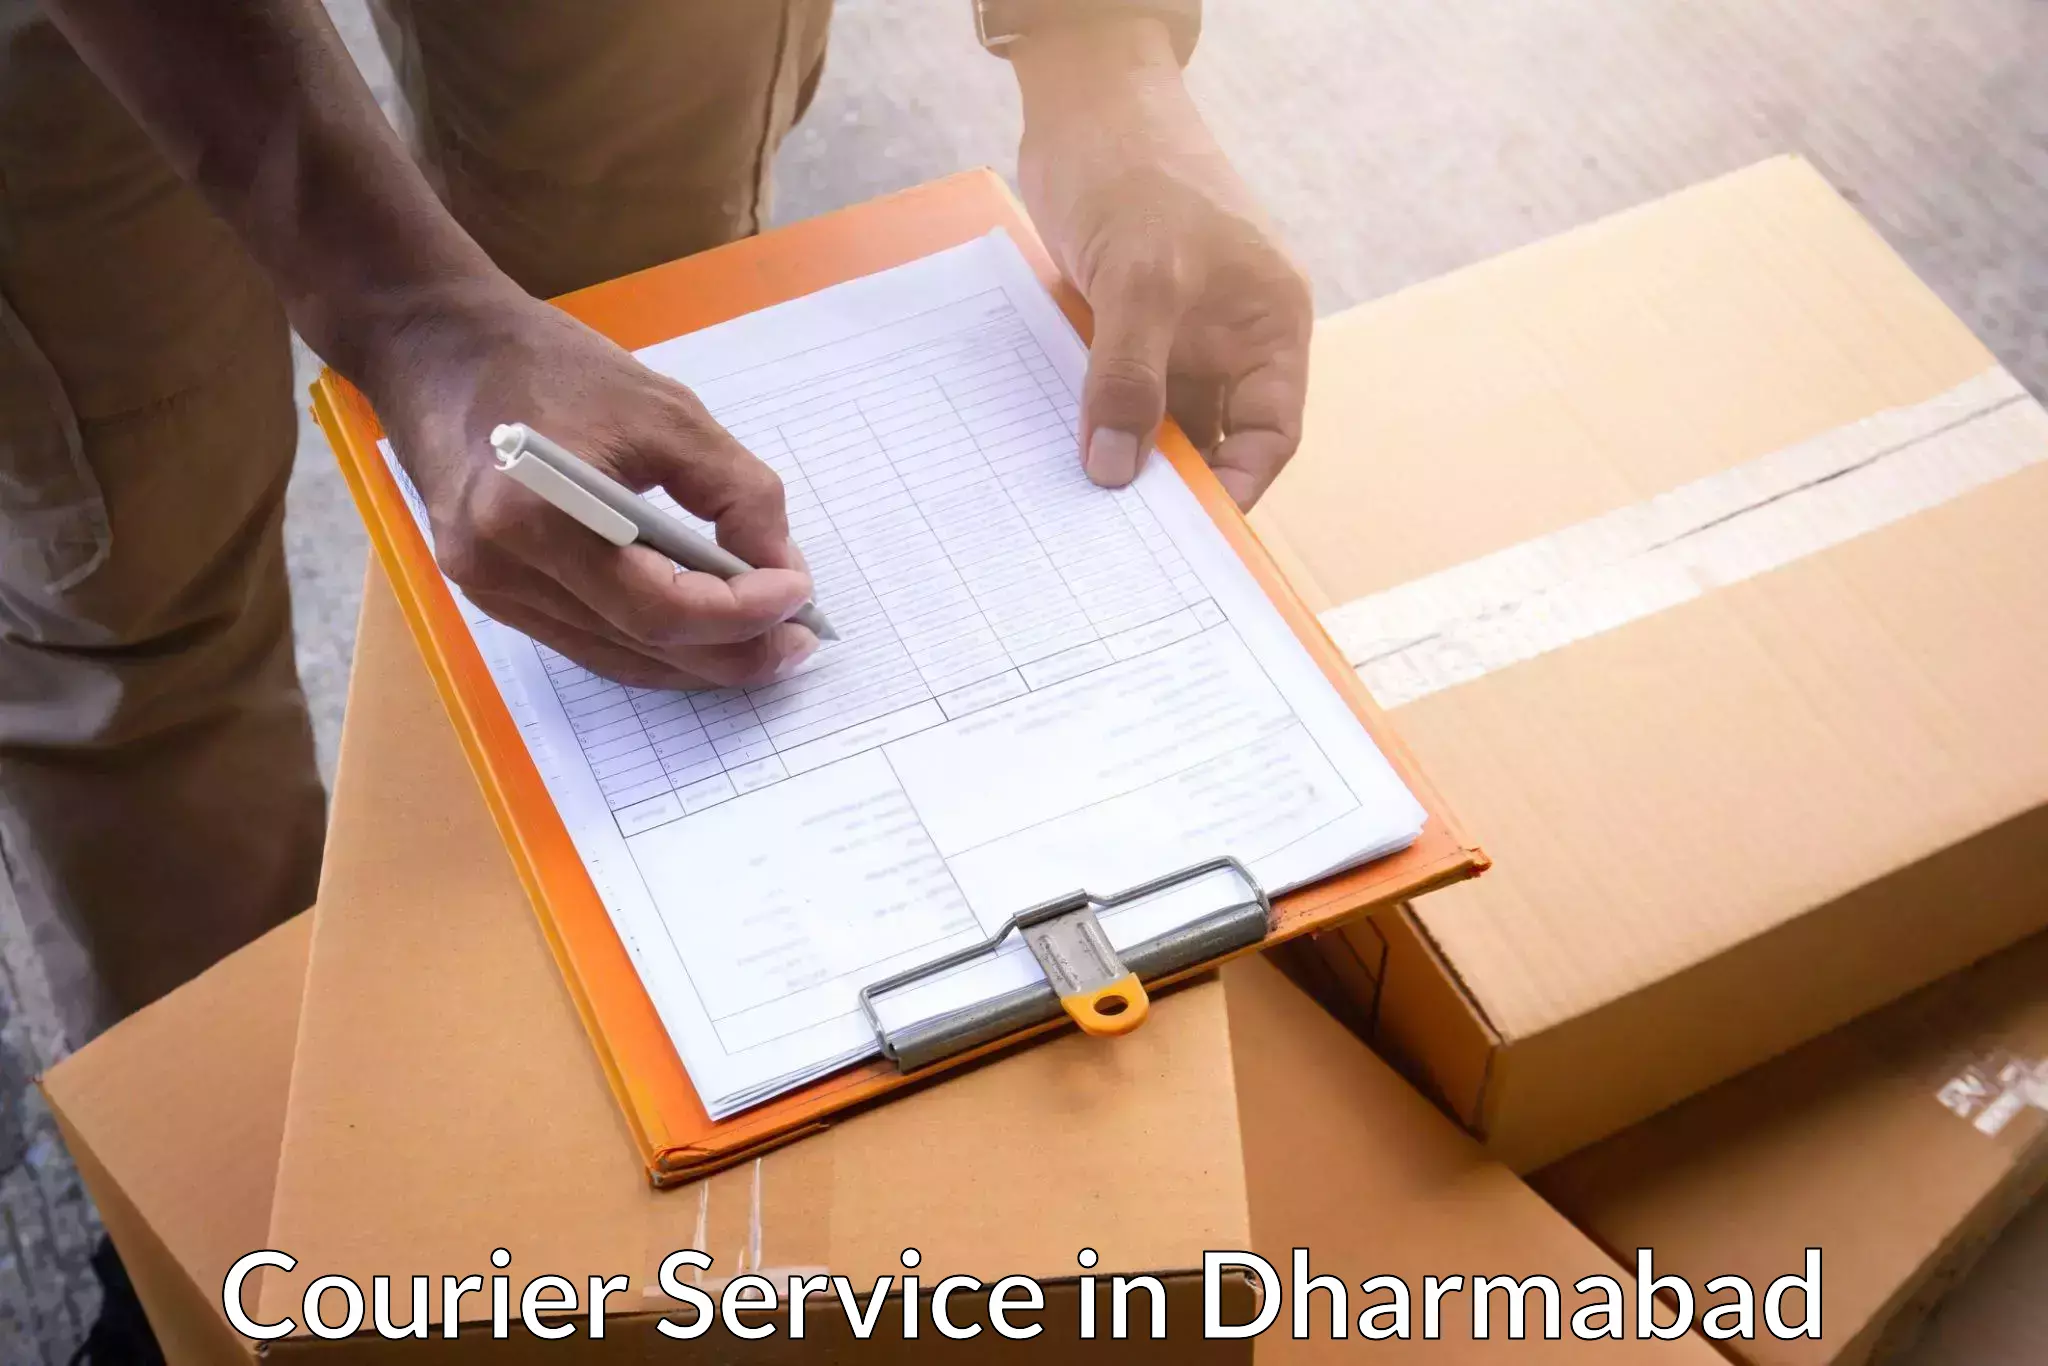 Streamlined delivery processes in Dharmabad